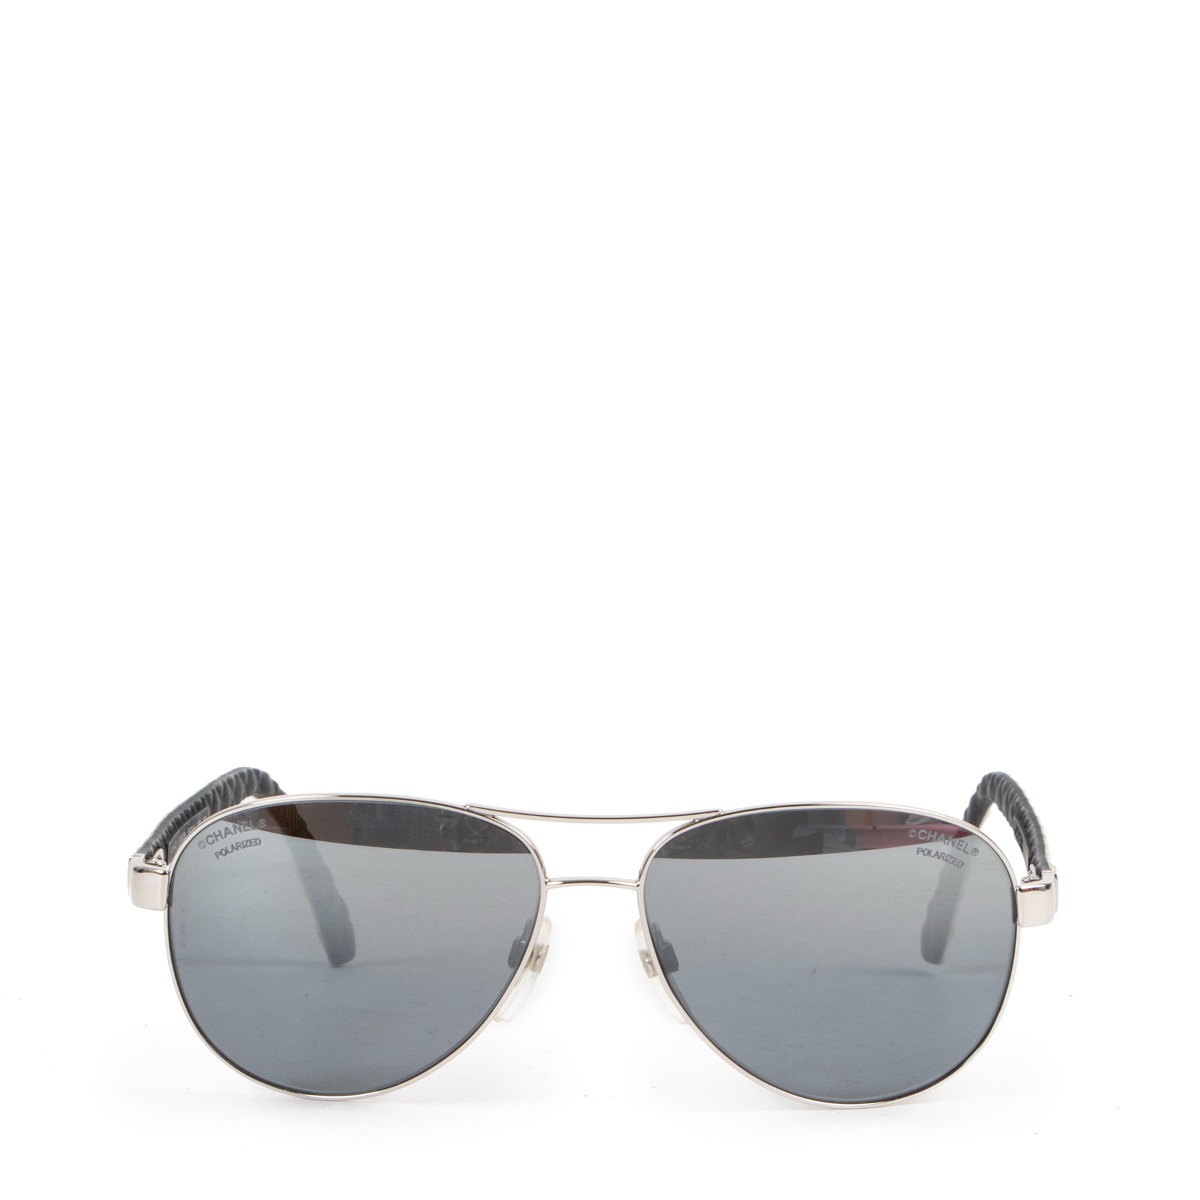 Chanel collection sunglasses - Gem